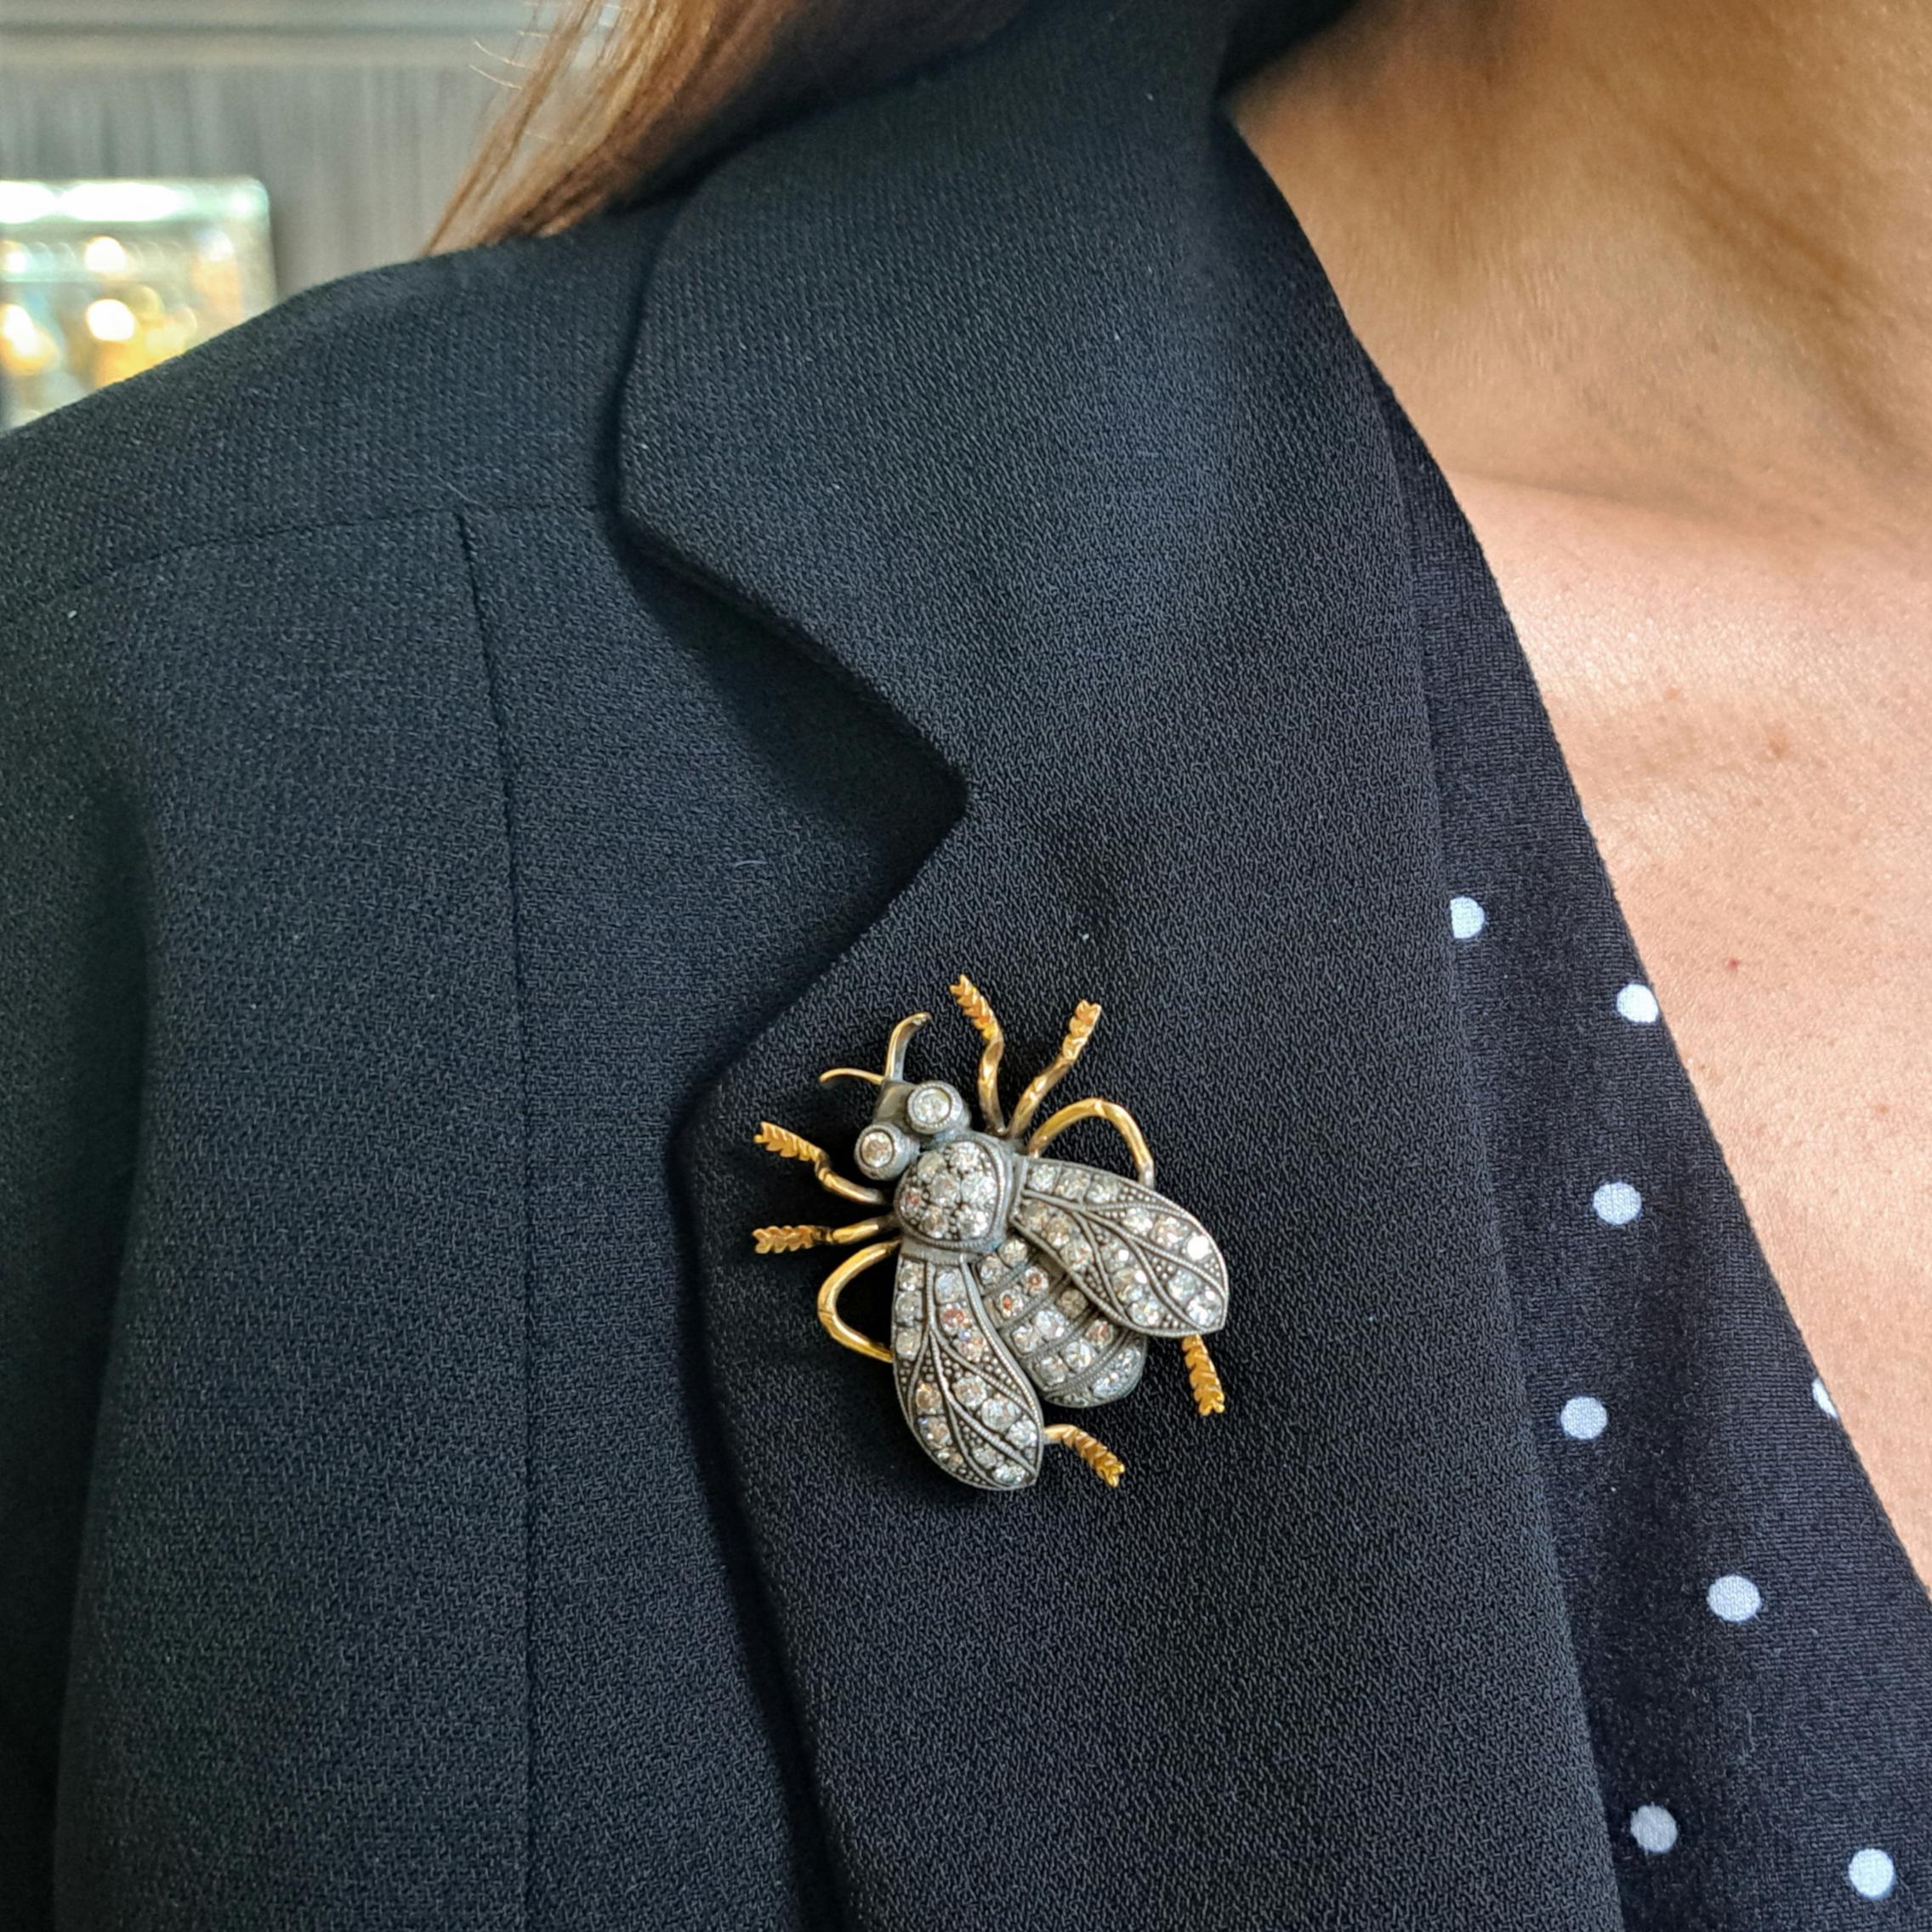 A modern bee brooch, set with eight-cut and round brilliant-cut diamonds in the wings, thorax, abdomen and head, with millegrain edges and wing markings, mounted in silver-upon-gold, with gold legs and antennae.